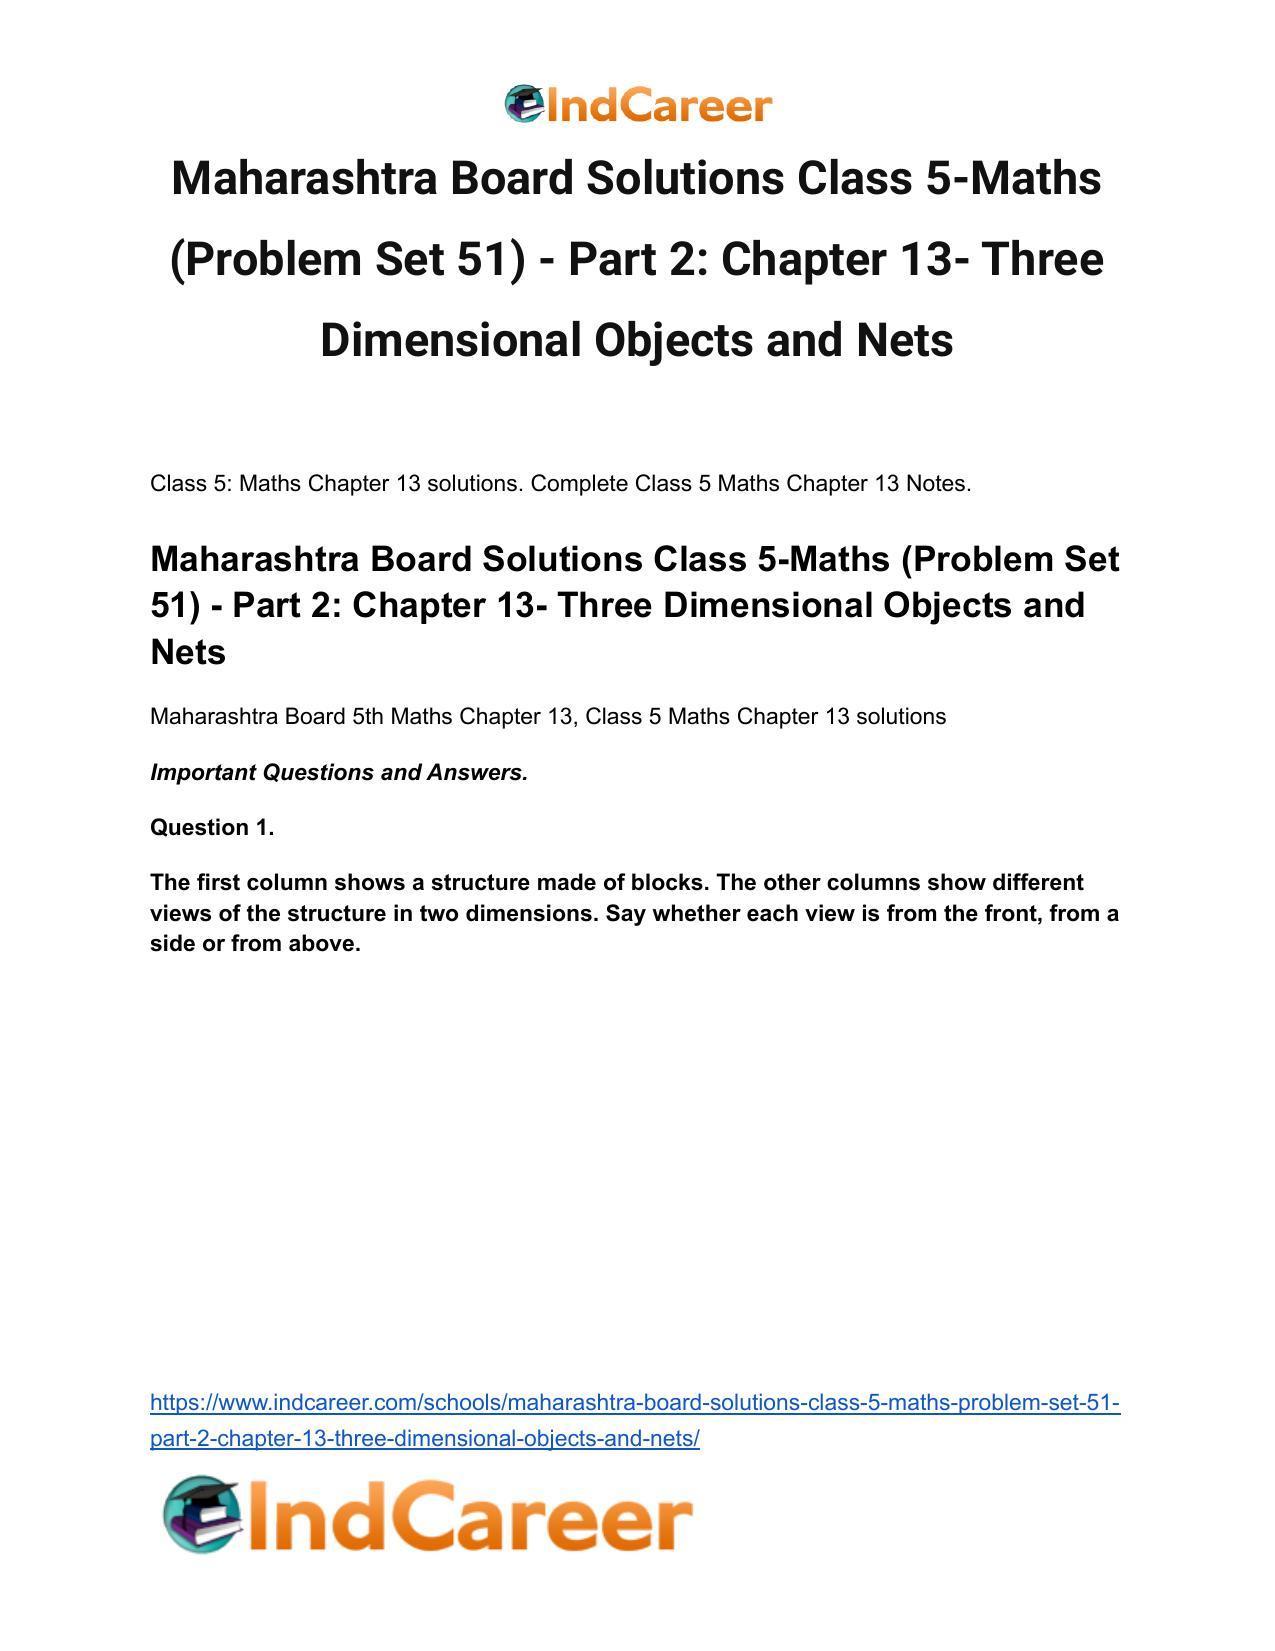 Maharashtra Board Solutions Class 5-Maths (Problem Set 51) - Part 2: Chapter 13- Three Dimensional Objects and Nets - Page 2